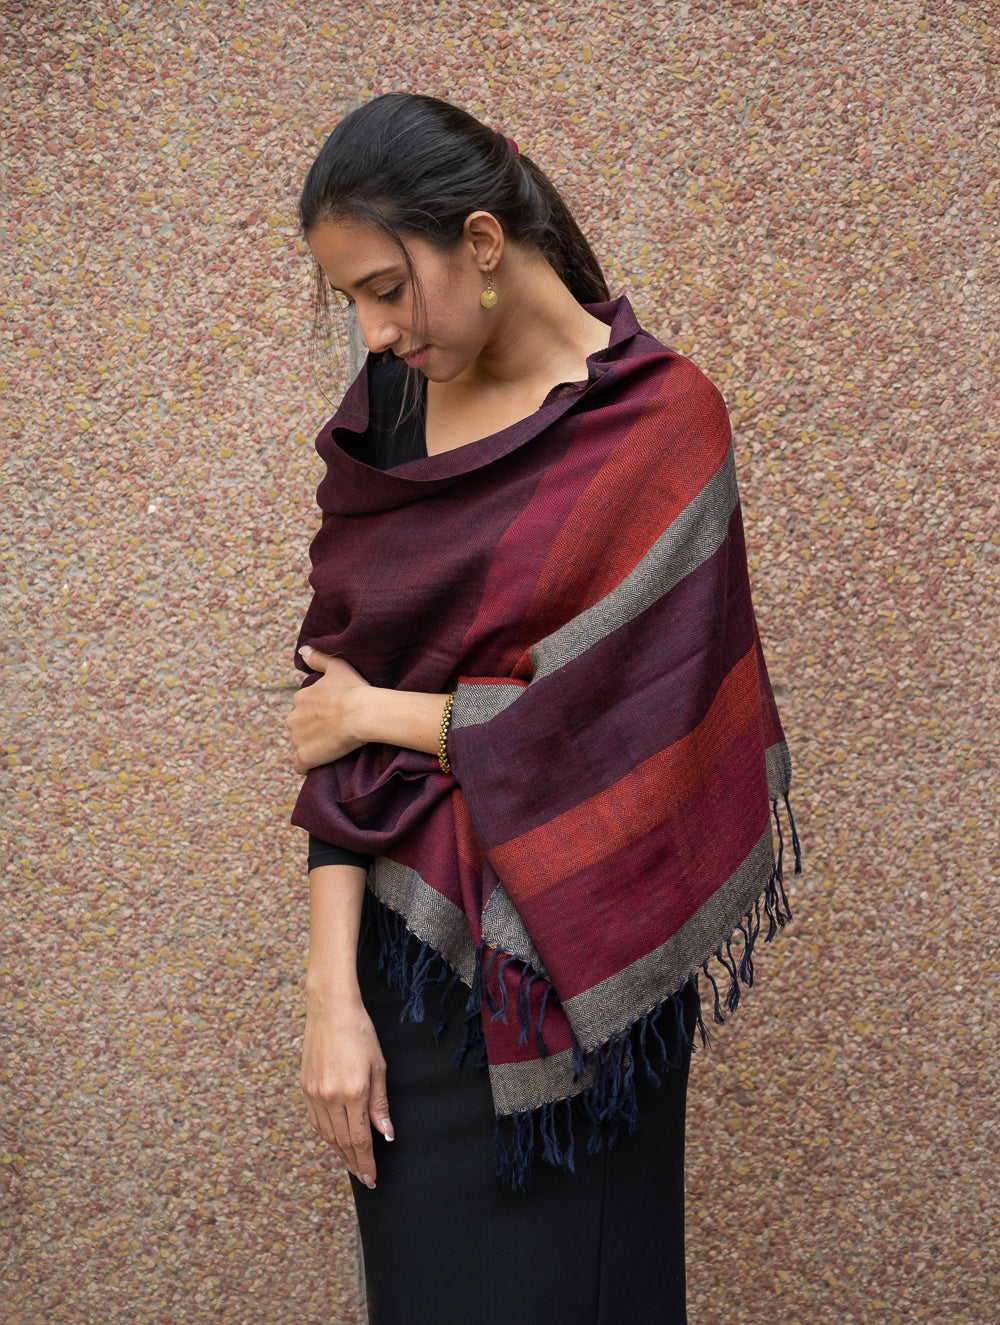 Load image into Gallery viewer, Fine, Soft Himachal Wool Striped Stole - Wine Red